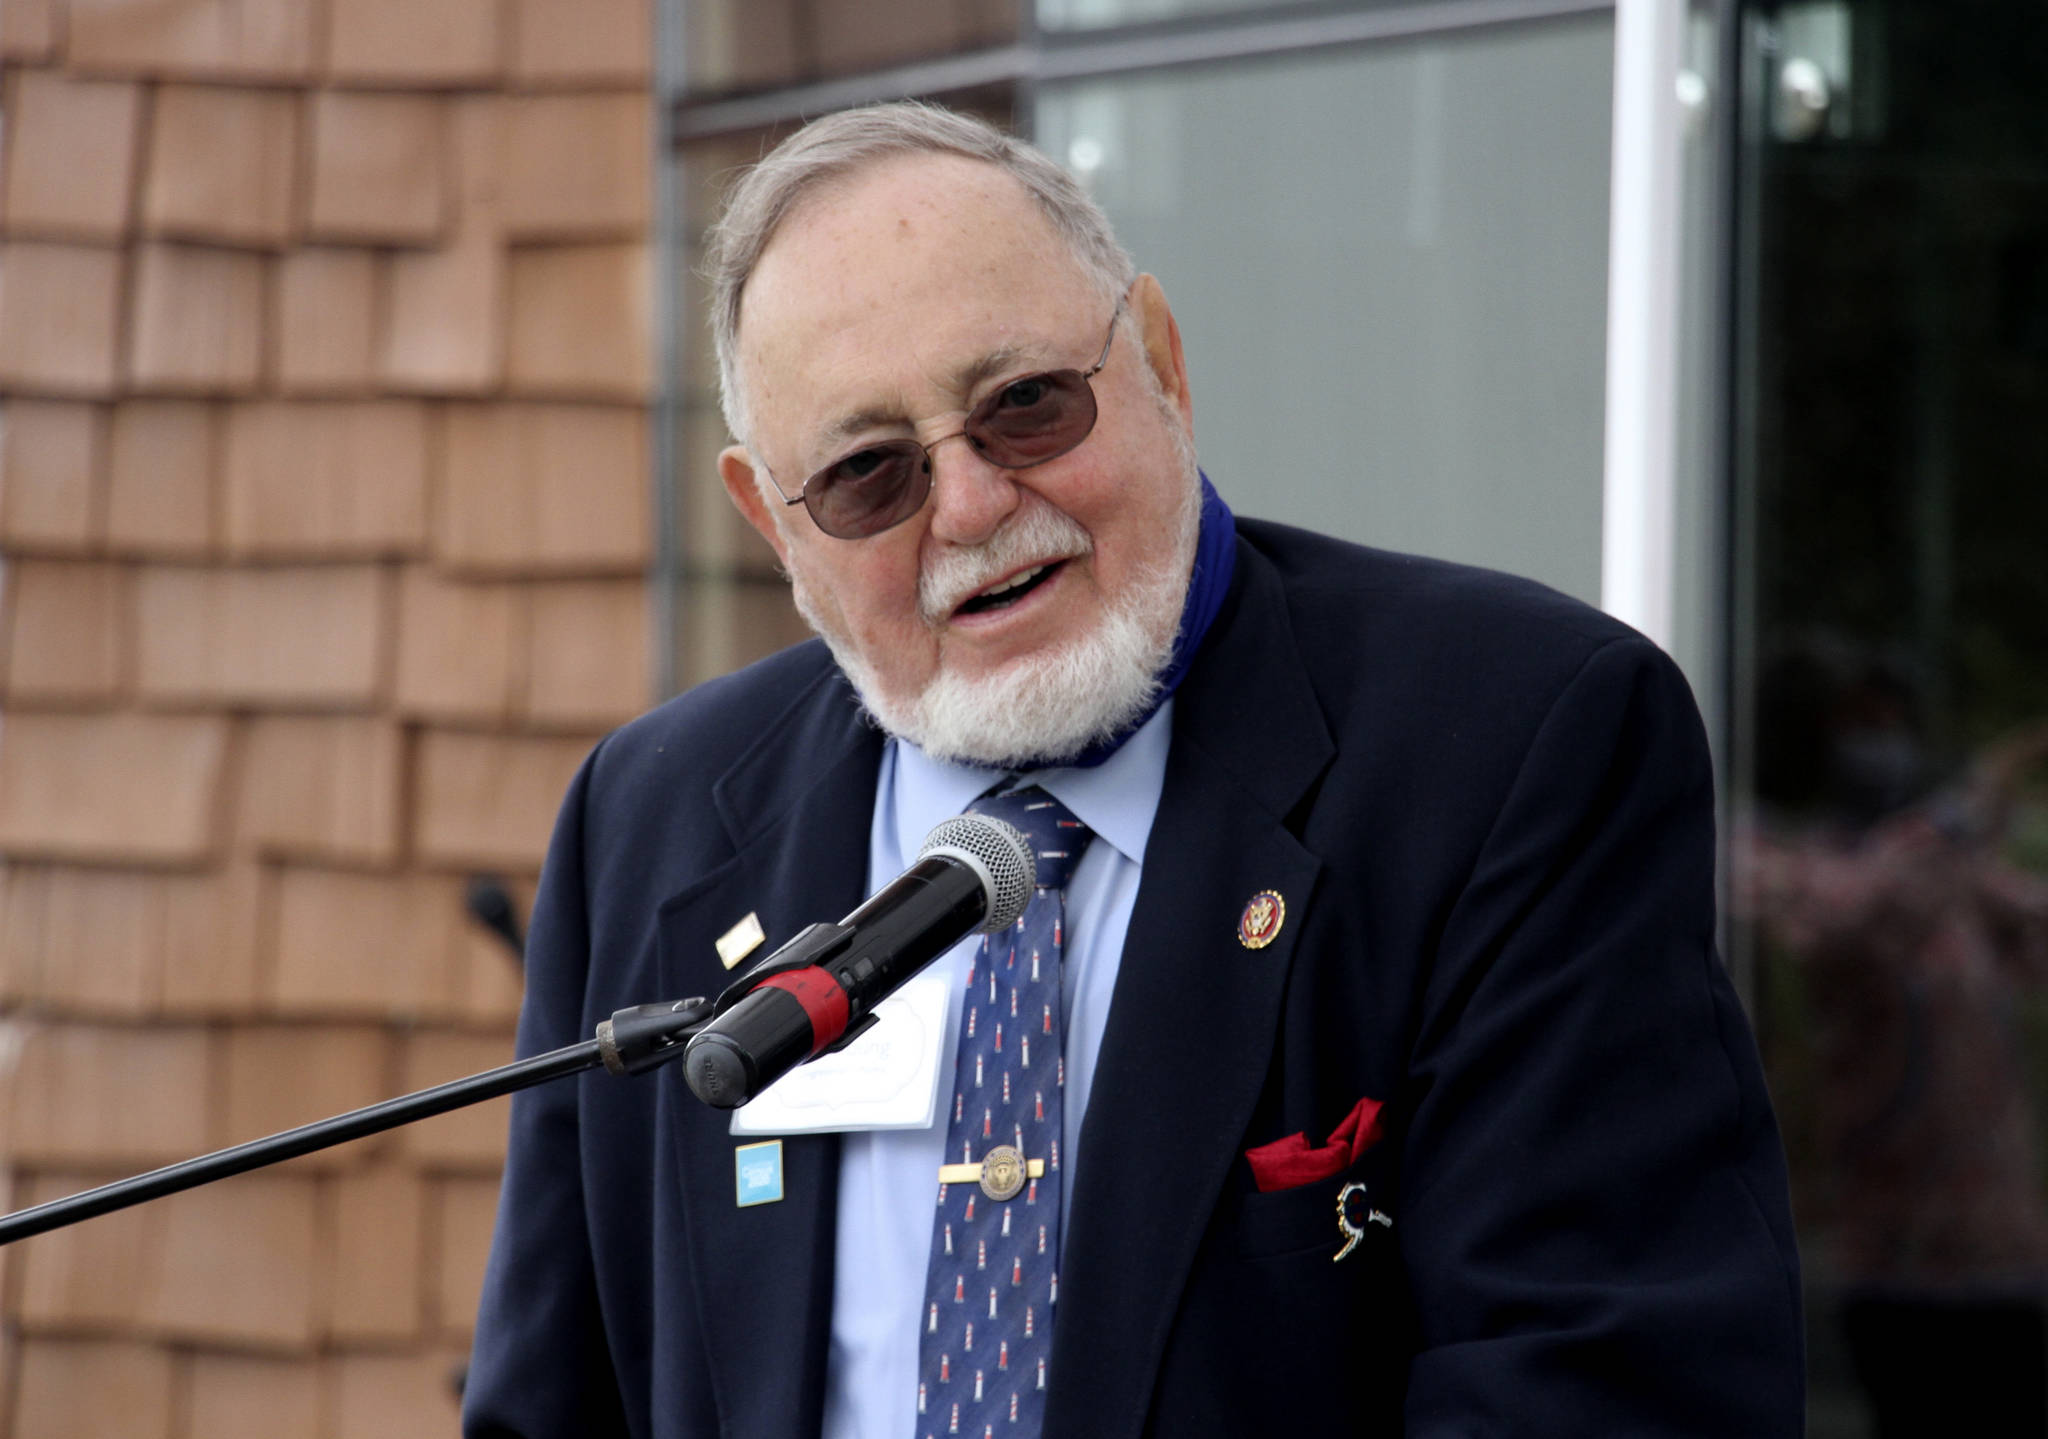 In this August photo, Republican U.S. Rep. Don Young speaks during a ceremony in Anchorage, Alaska. (AP Photo / Mark Thiessen)